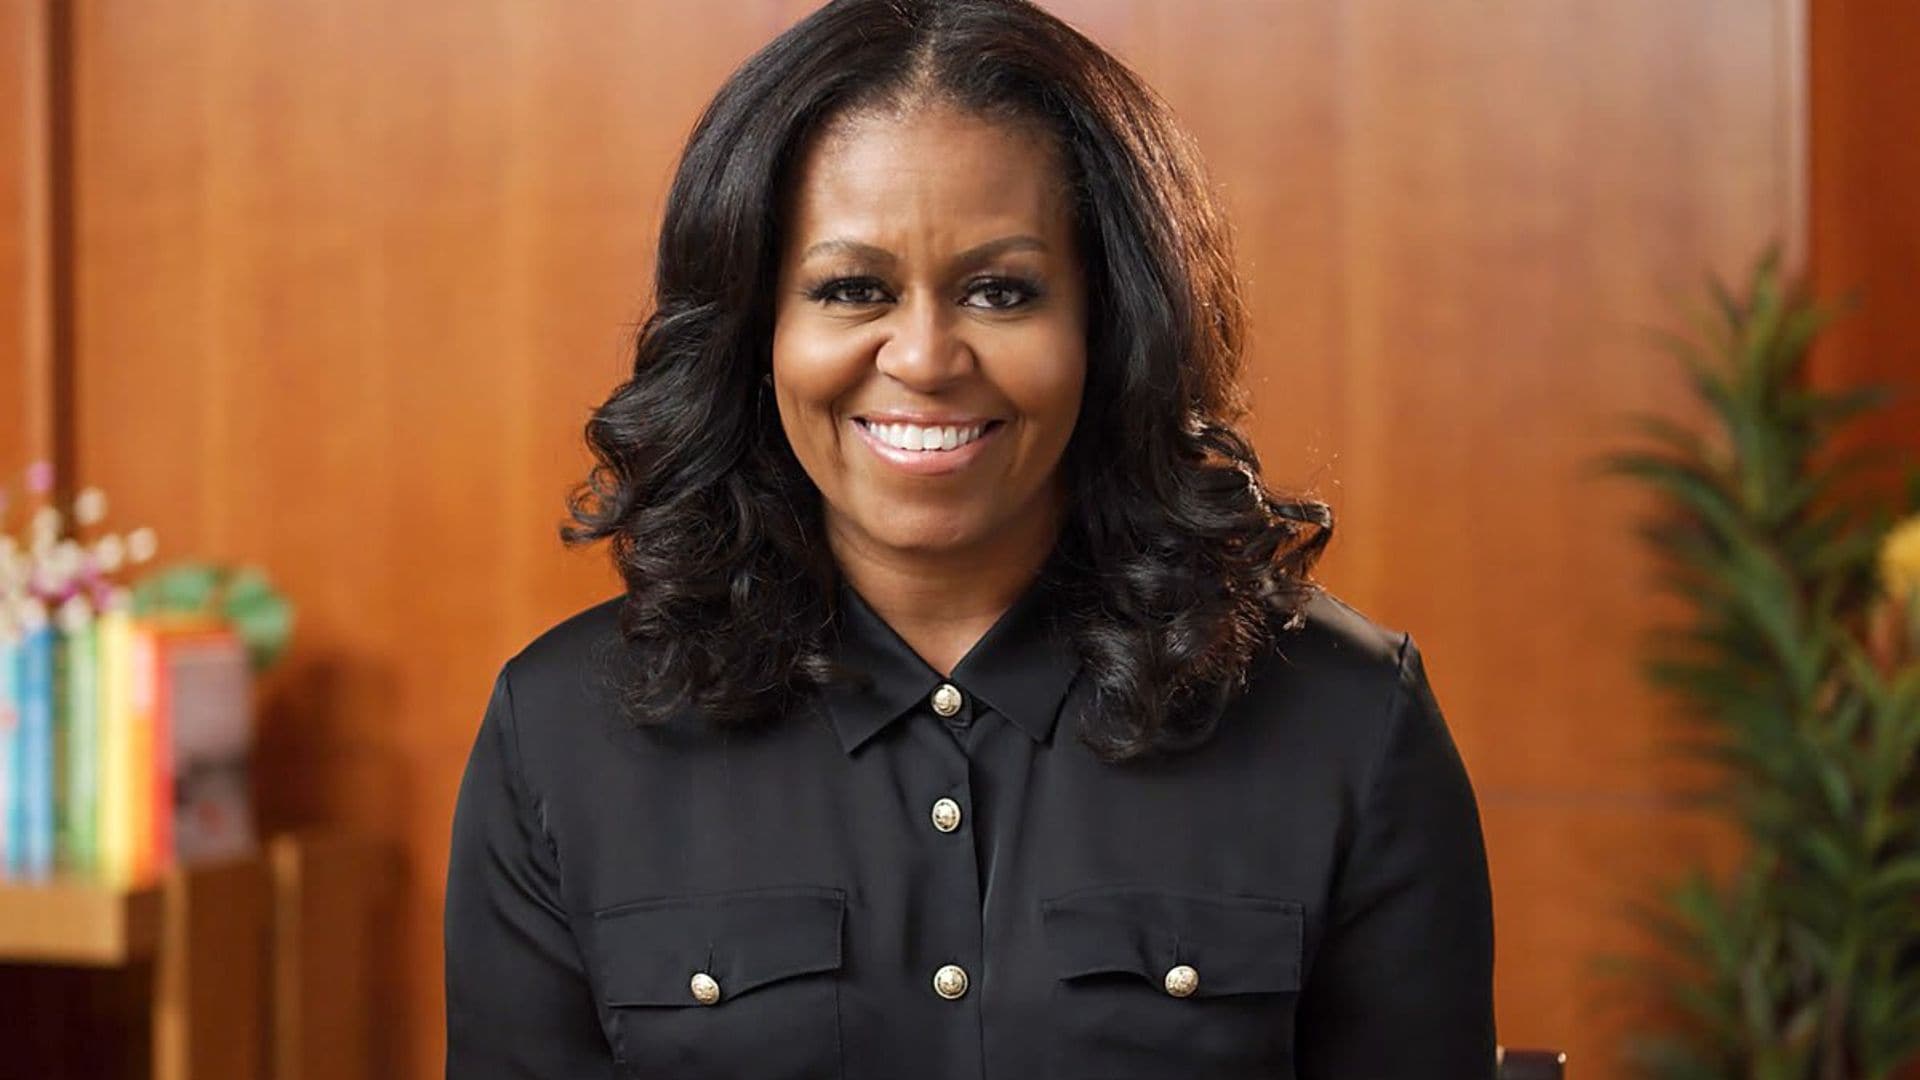 Michelle Obama has chosen the old-fashioned craft of knitting to create tops for her daughters